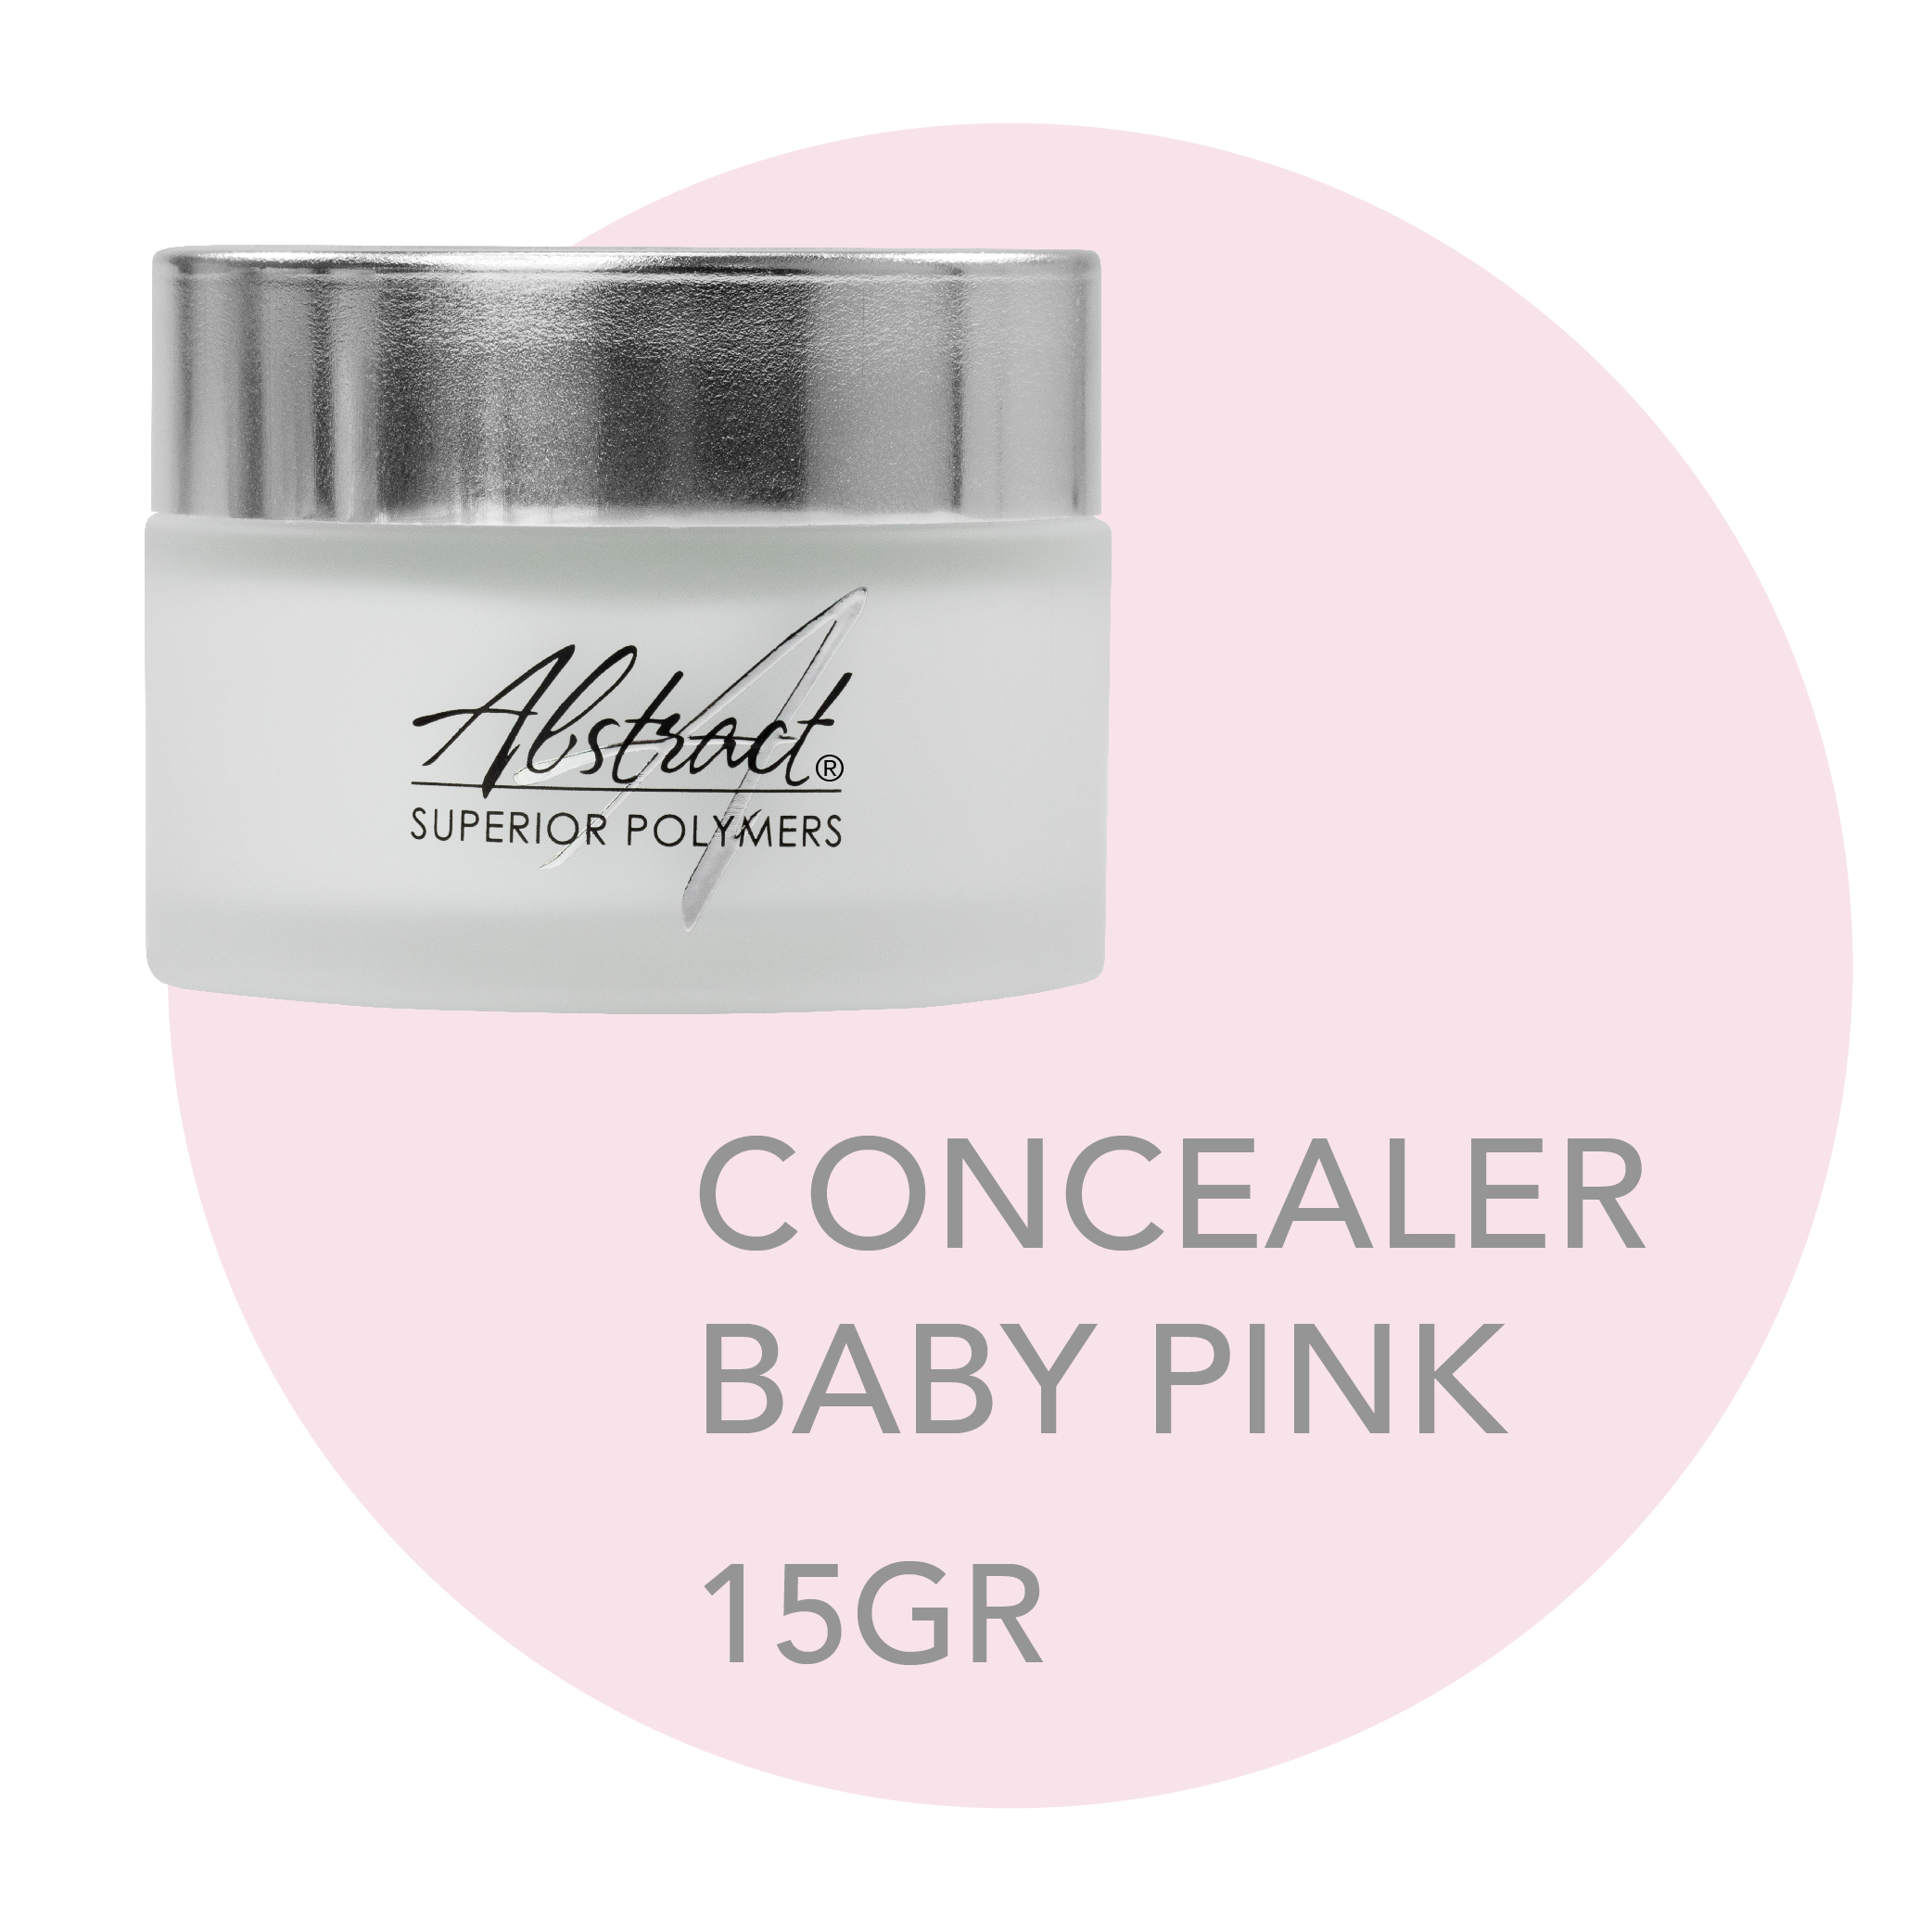 Superior Polymer CONCEALER BABY PINK 15gr, Abstract | 188973